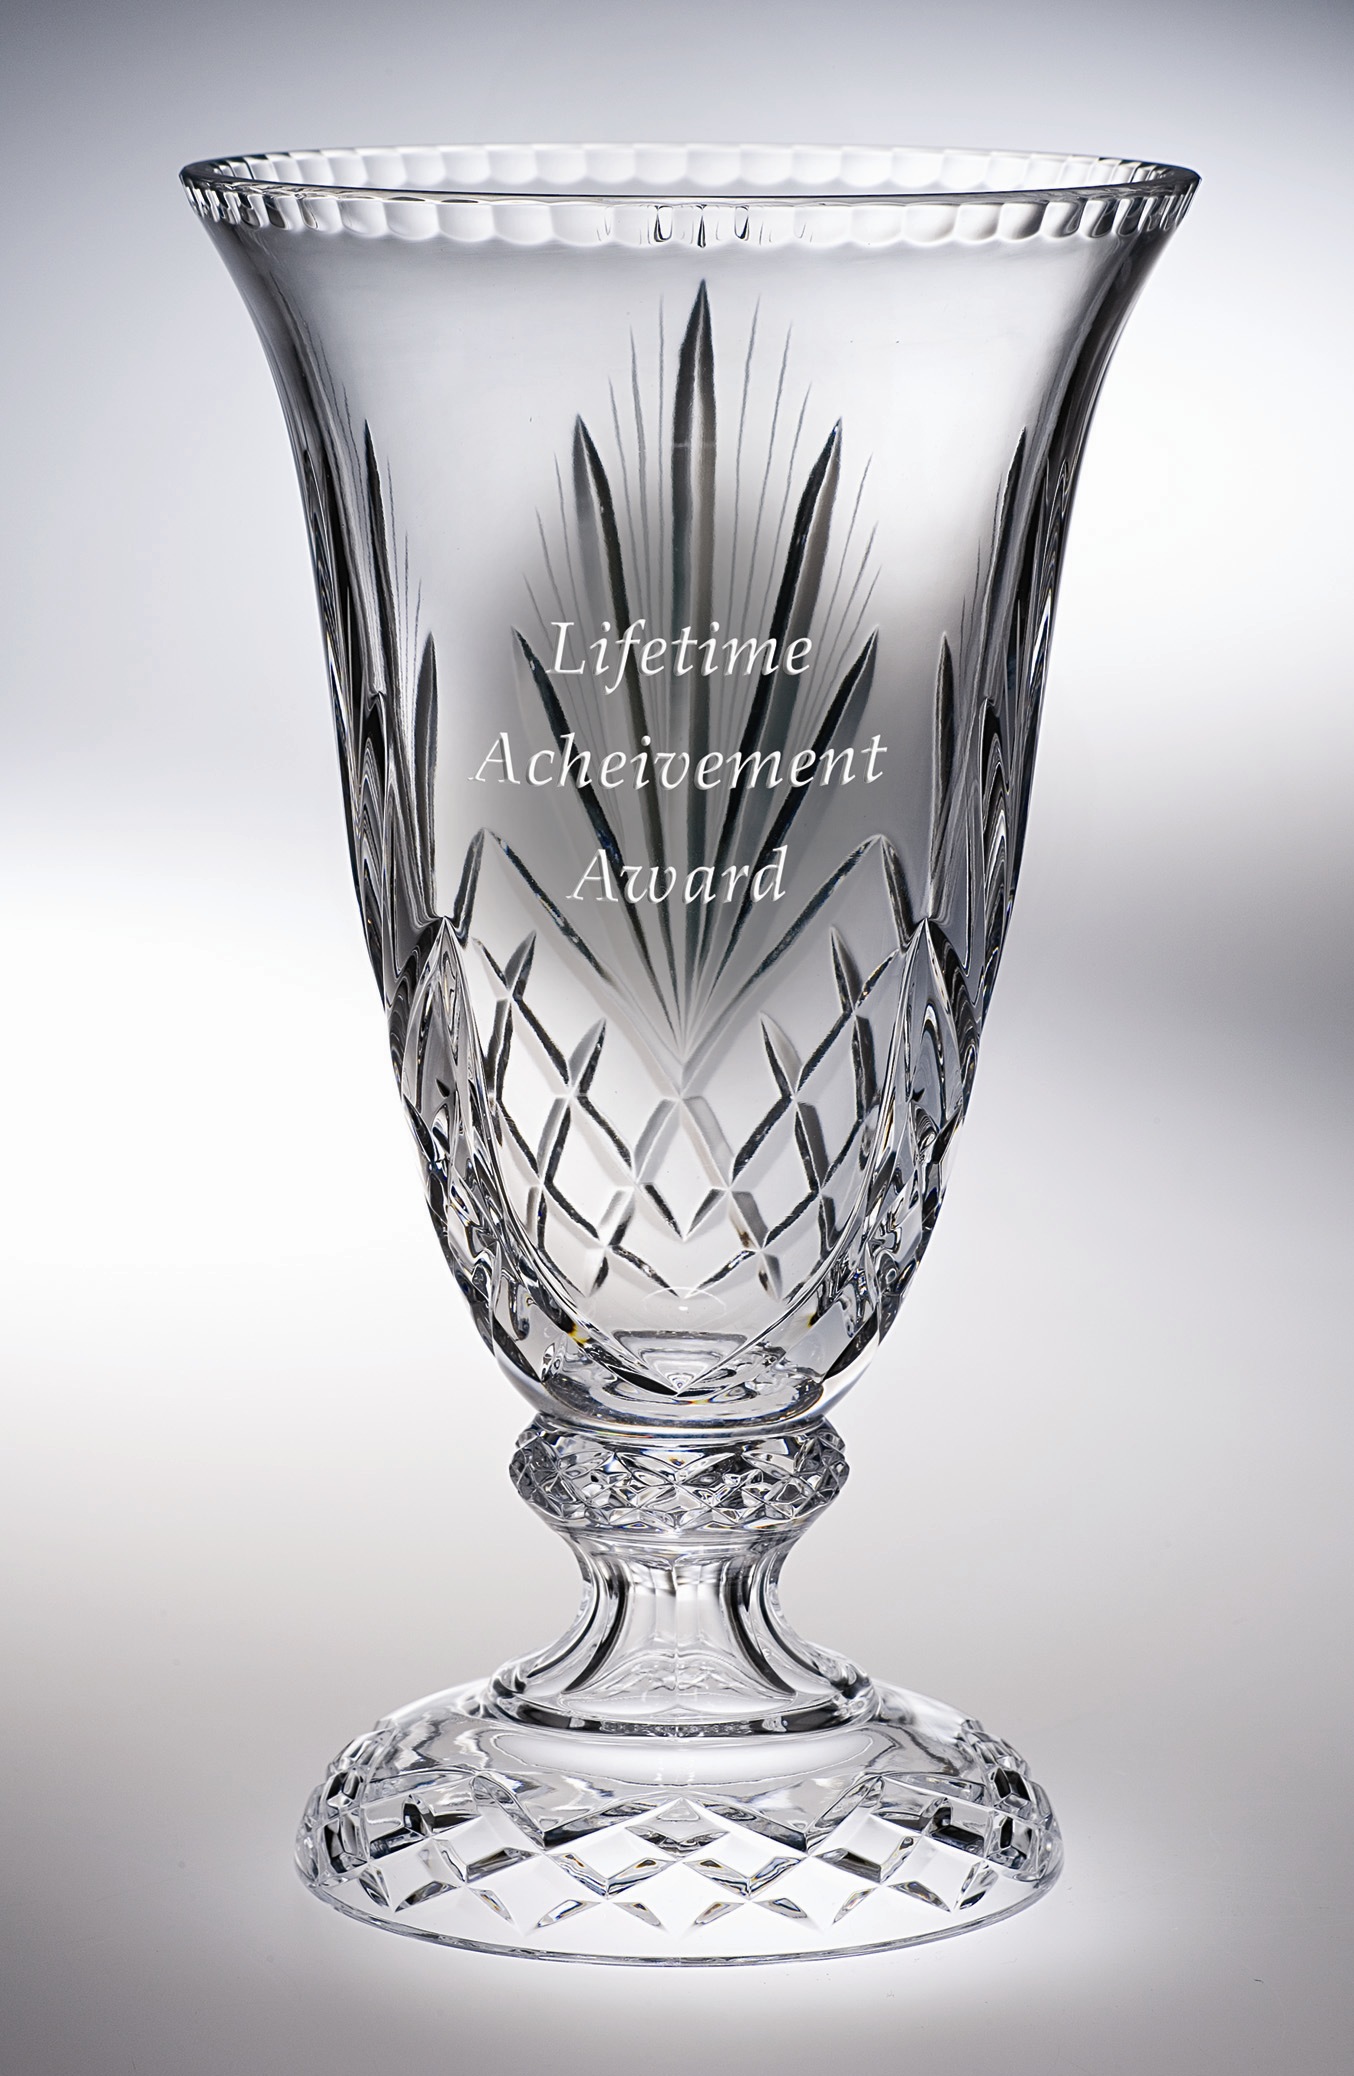 Having trouble choosing a corporate gift? Our collection of crystal vases may be the usable gift you’ve been looking for.